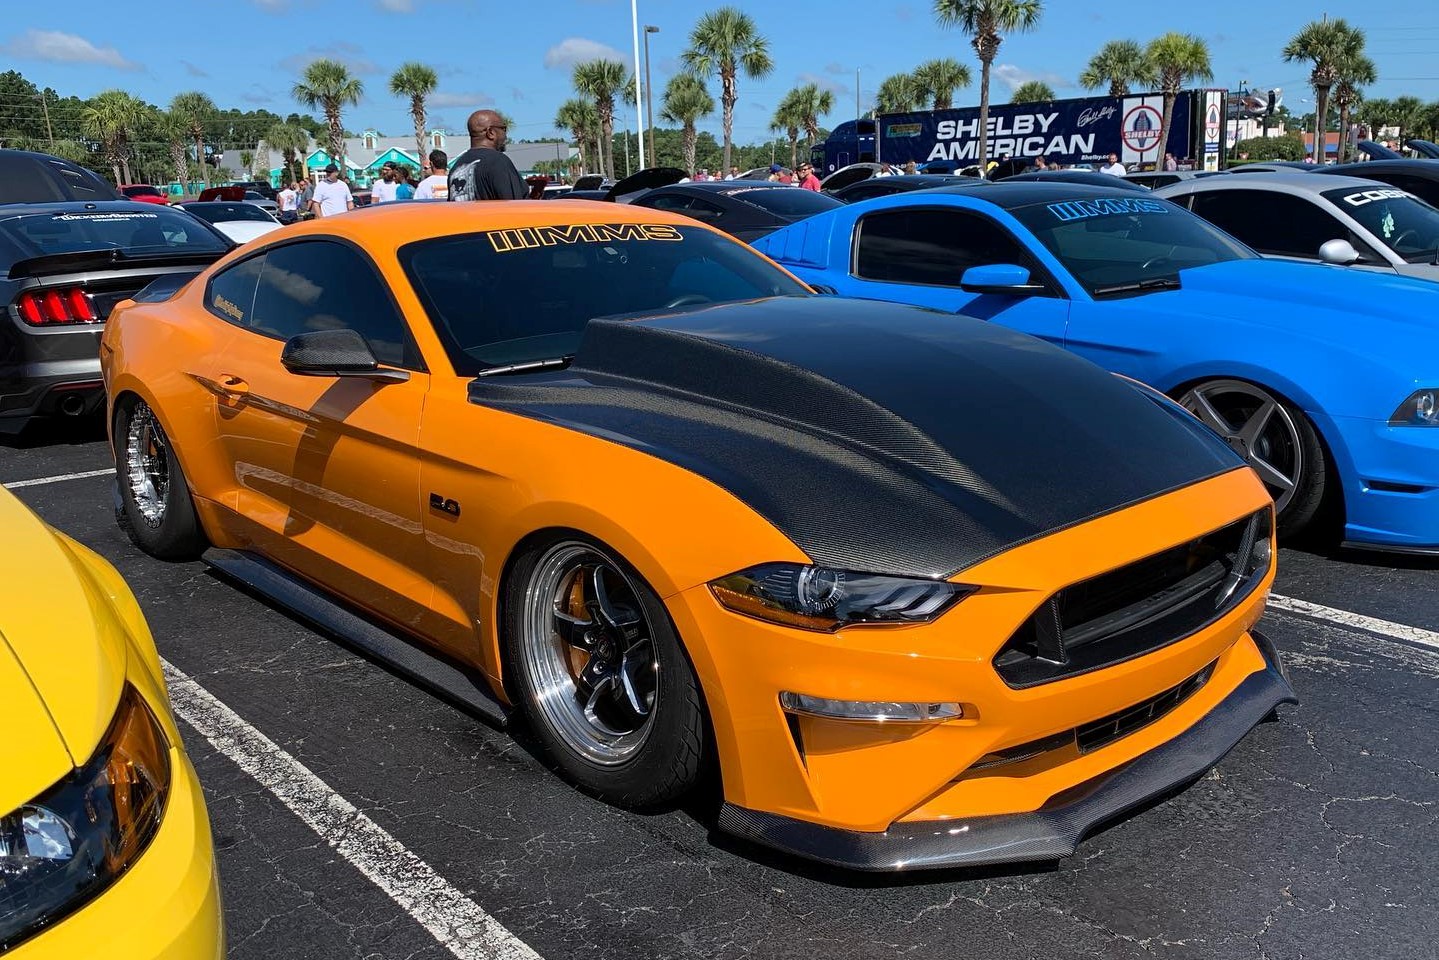 Mustang Week 2020 Officially Cancelled Because Of COVID-19 Restrictions